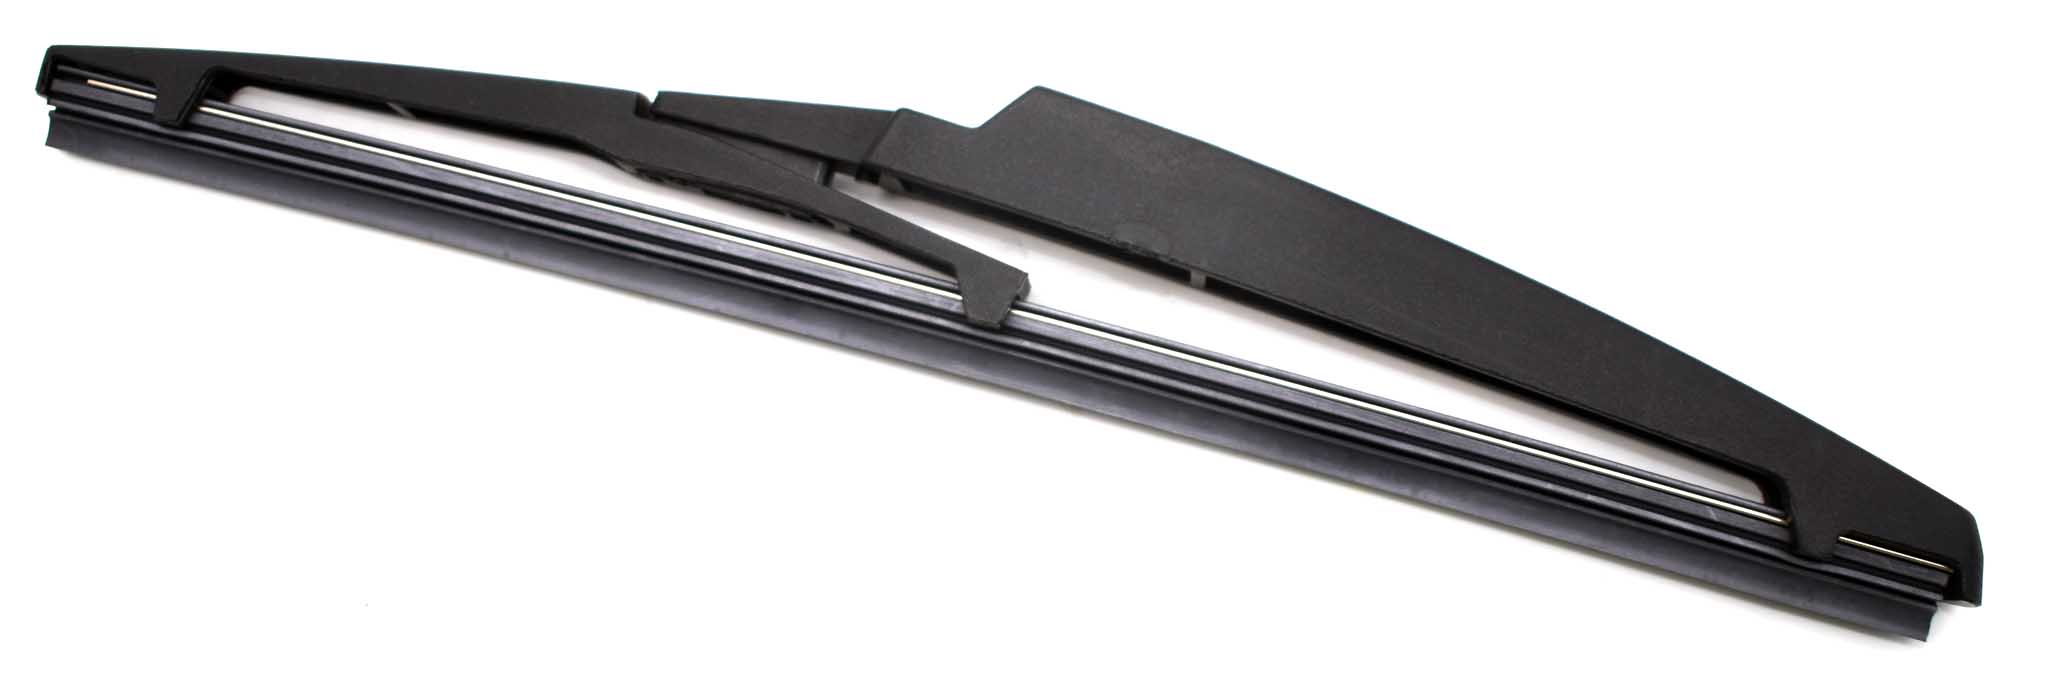 WIPER BLADE SUITABLE FOR MG ZS REAR